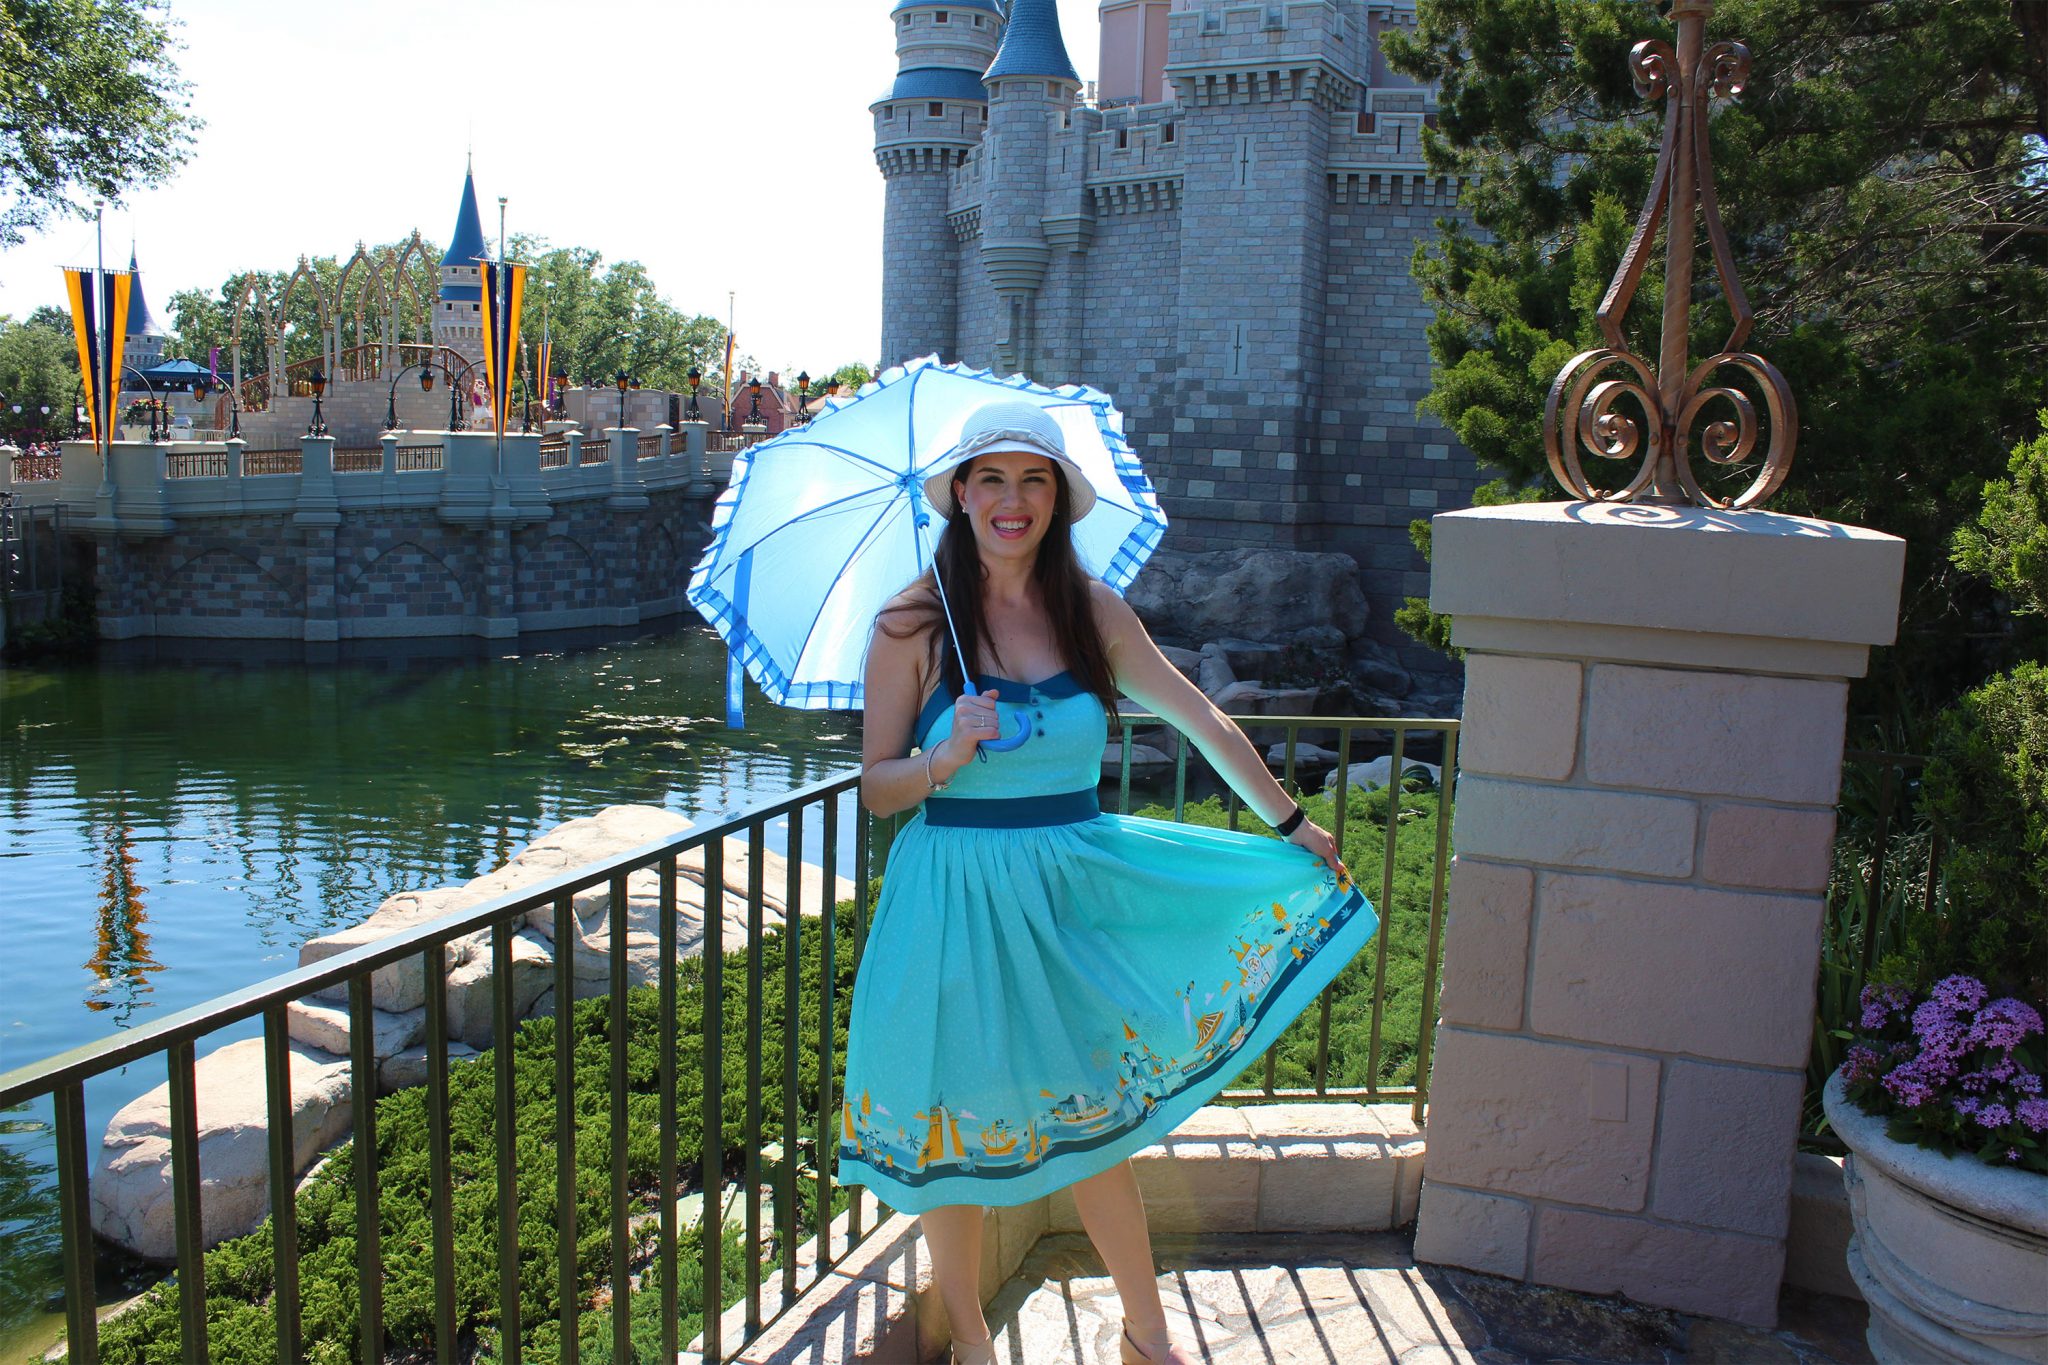 Chelsea in front of the Castle on Dapper Day.